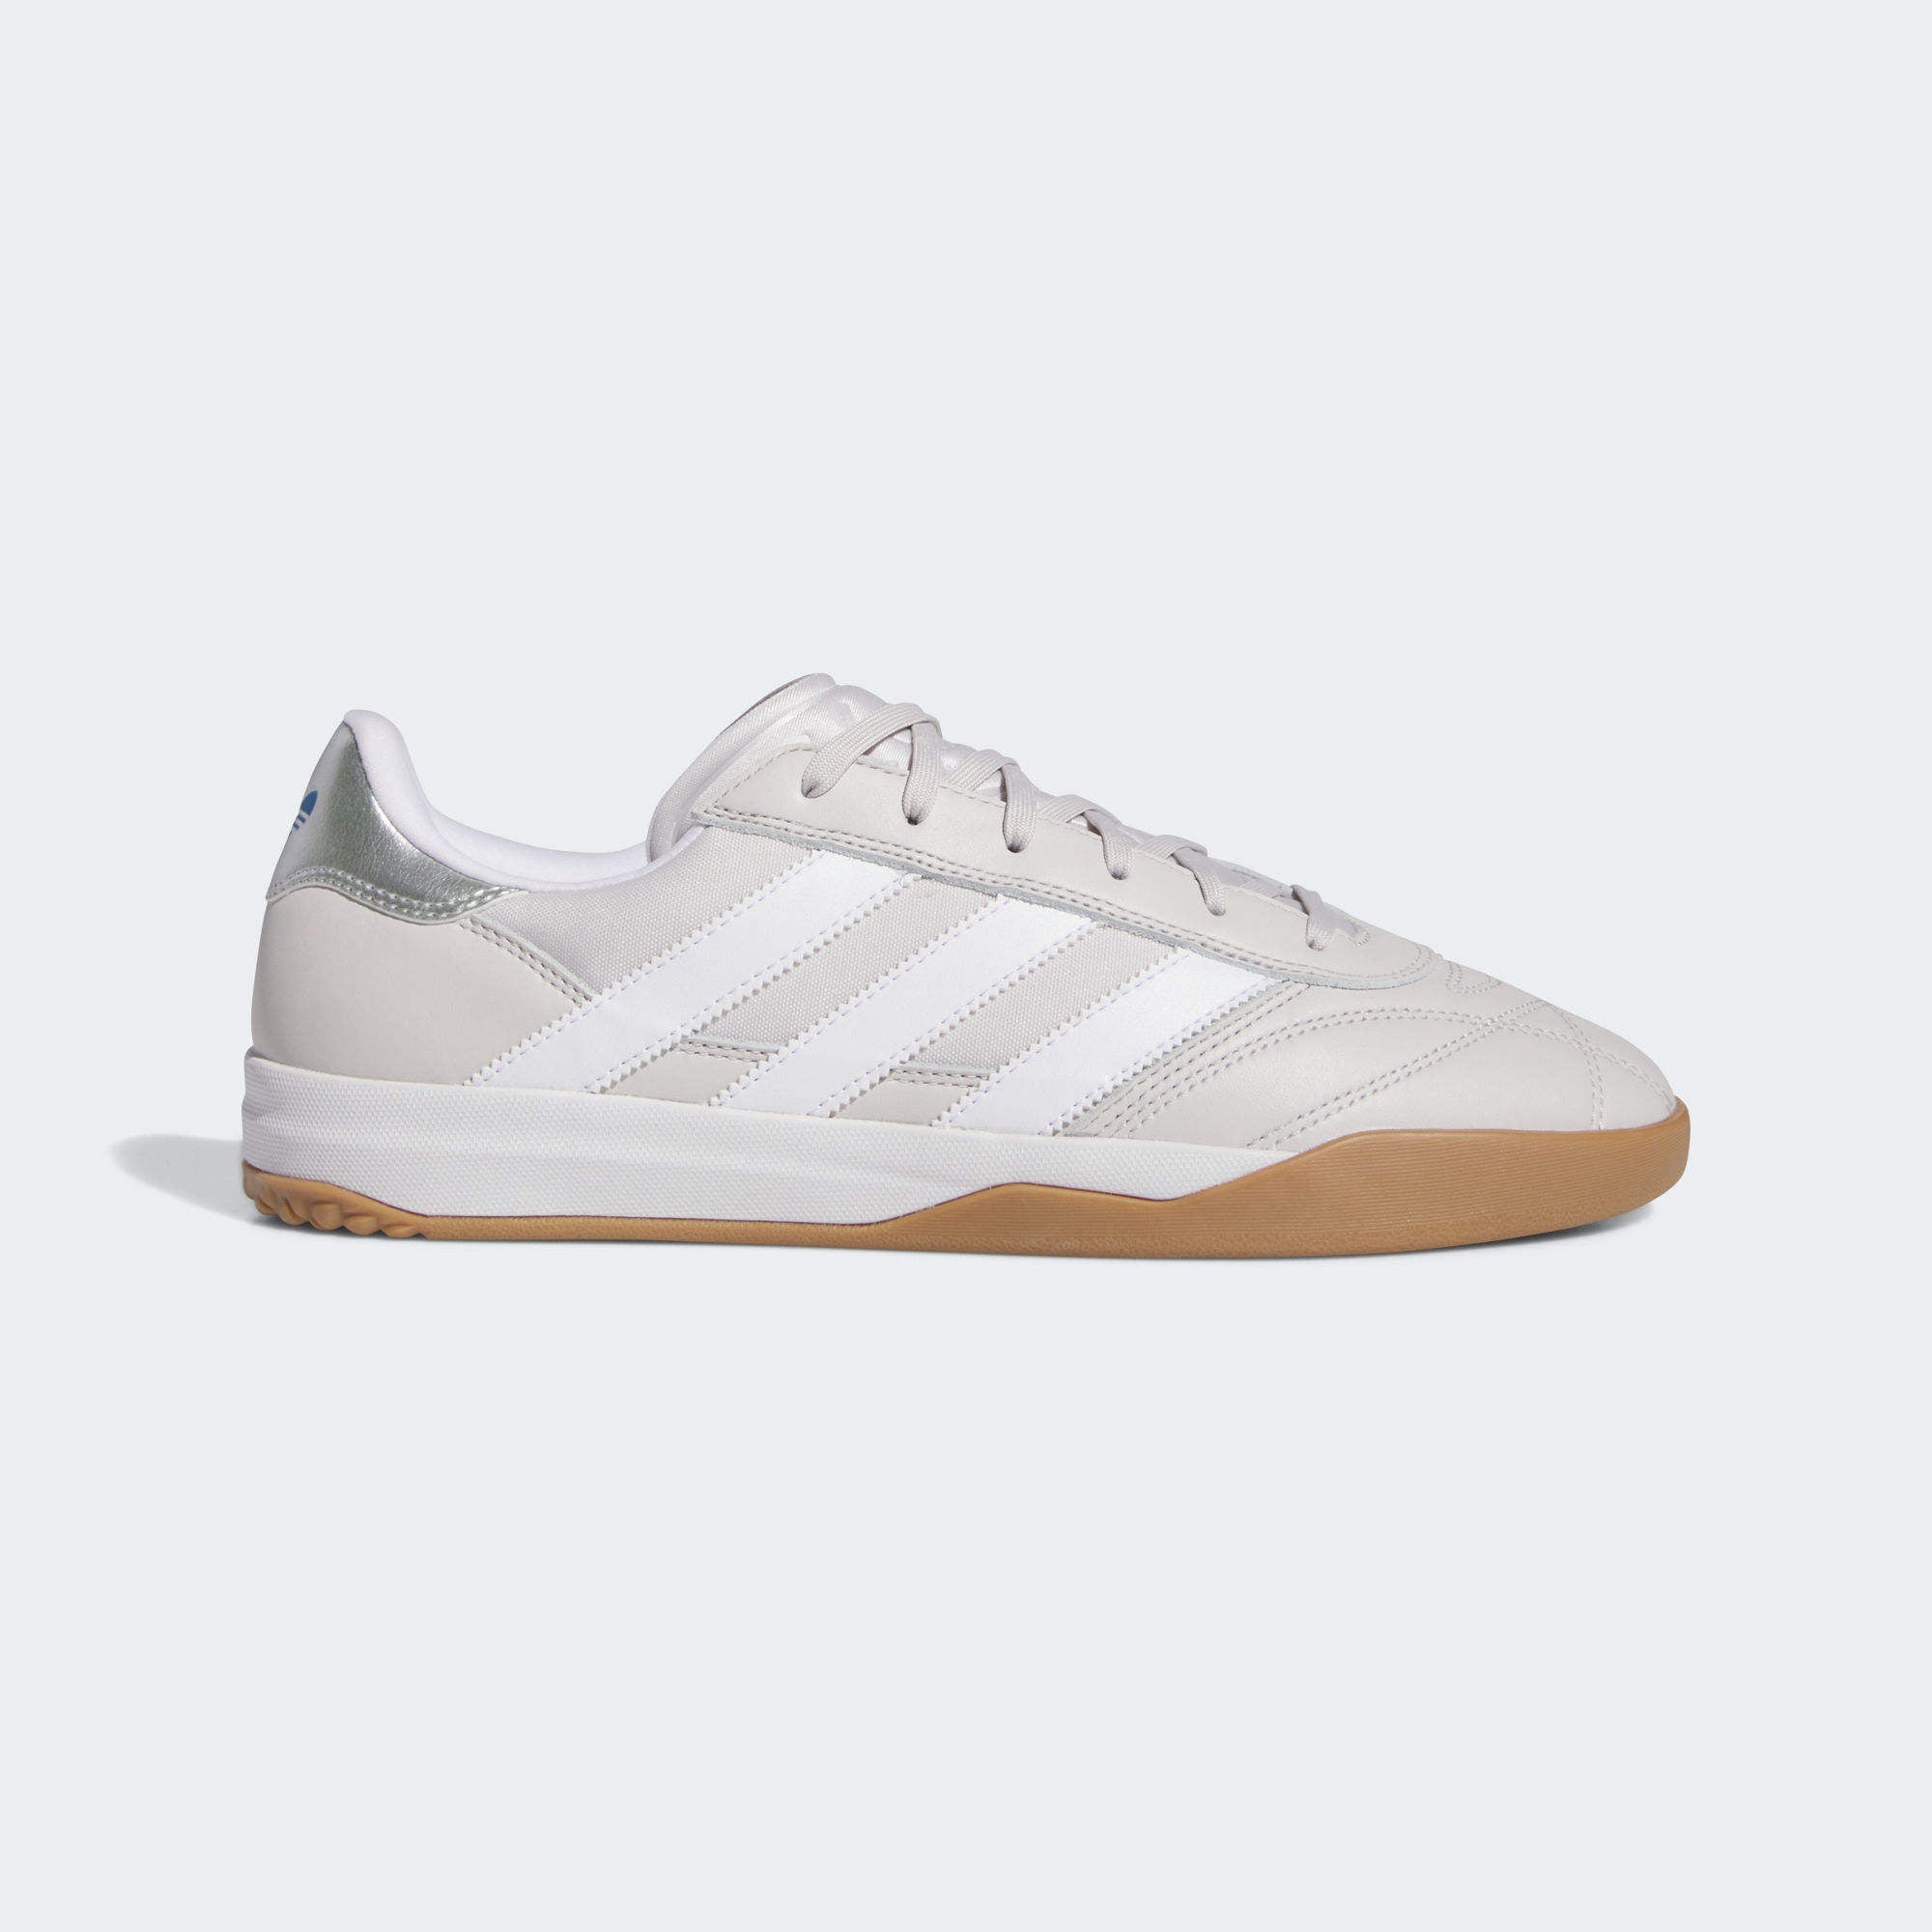 Adidas - Copa Premiere Shoes IF7528 [Grey/White]